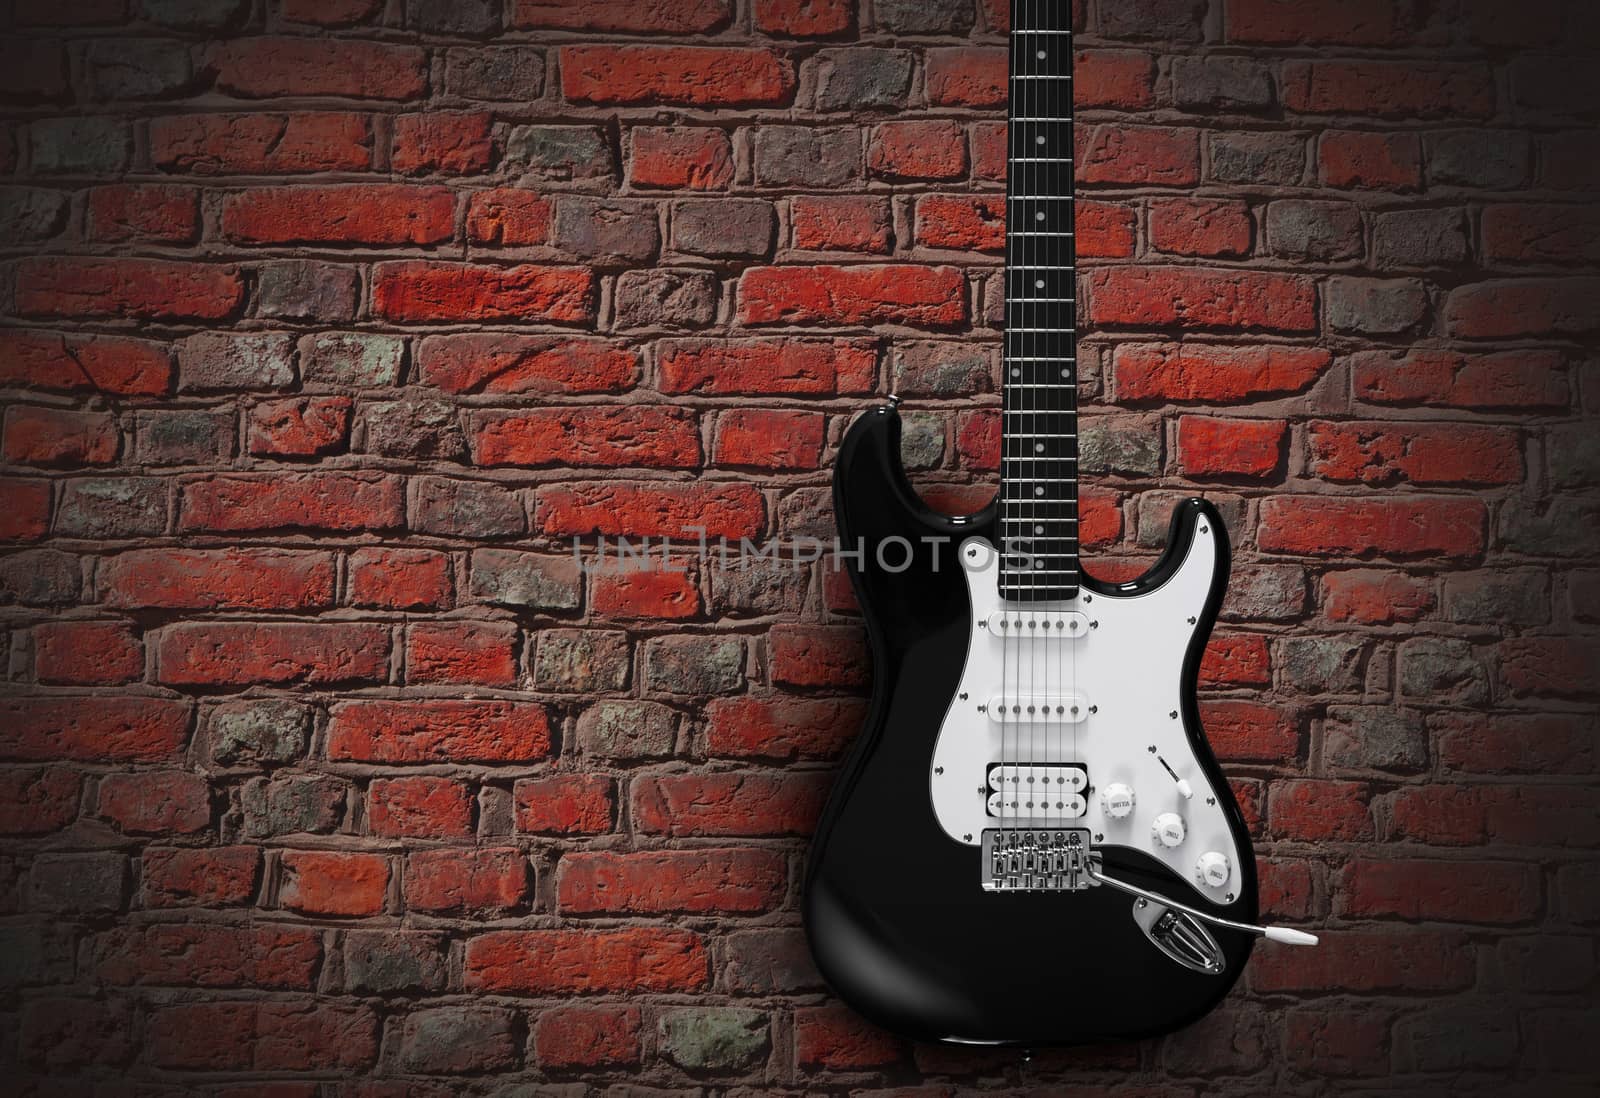 Black electric guitar on red brick wall background by SlayCer